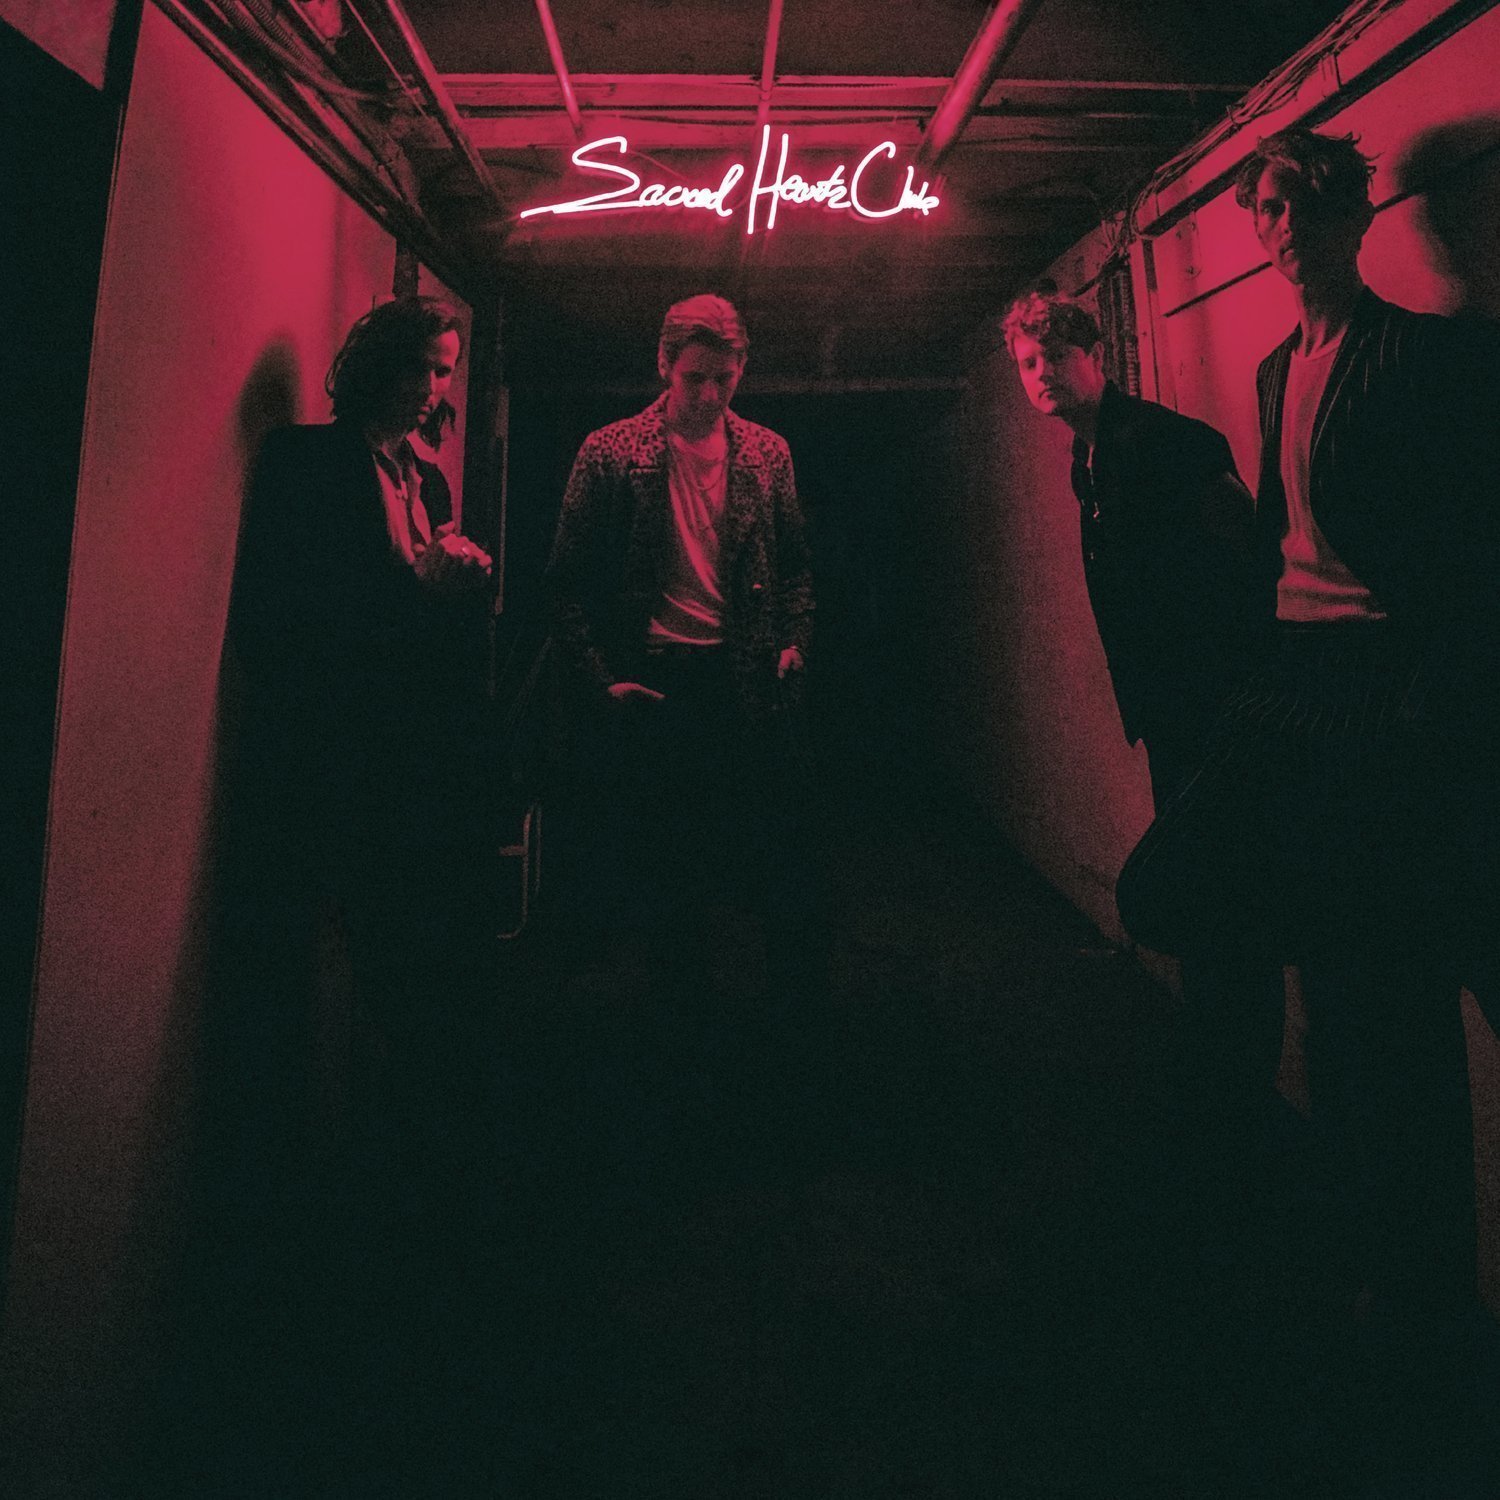 Vinylskiva Foster The People Sacred Hearts Club (LP)